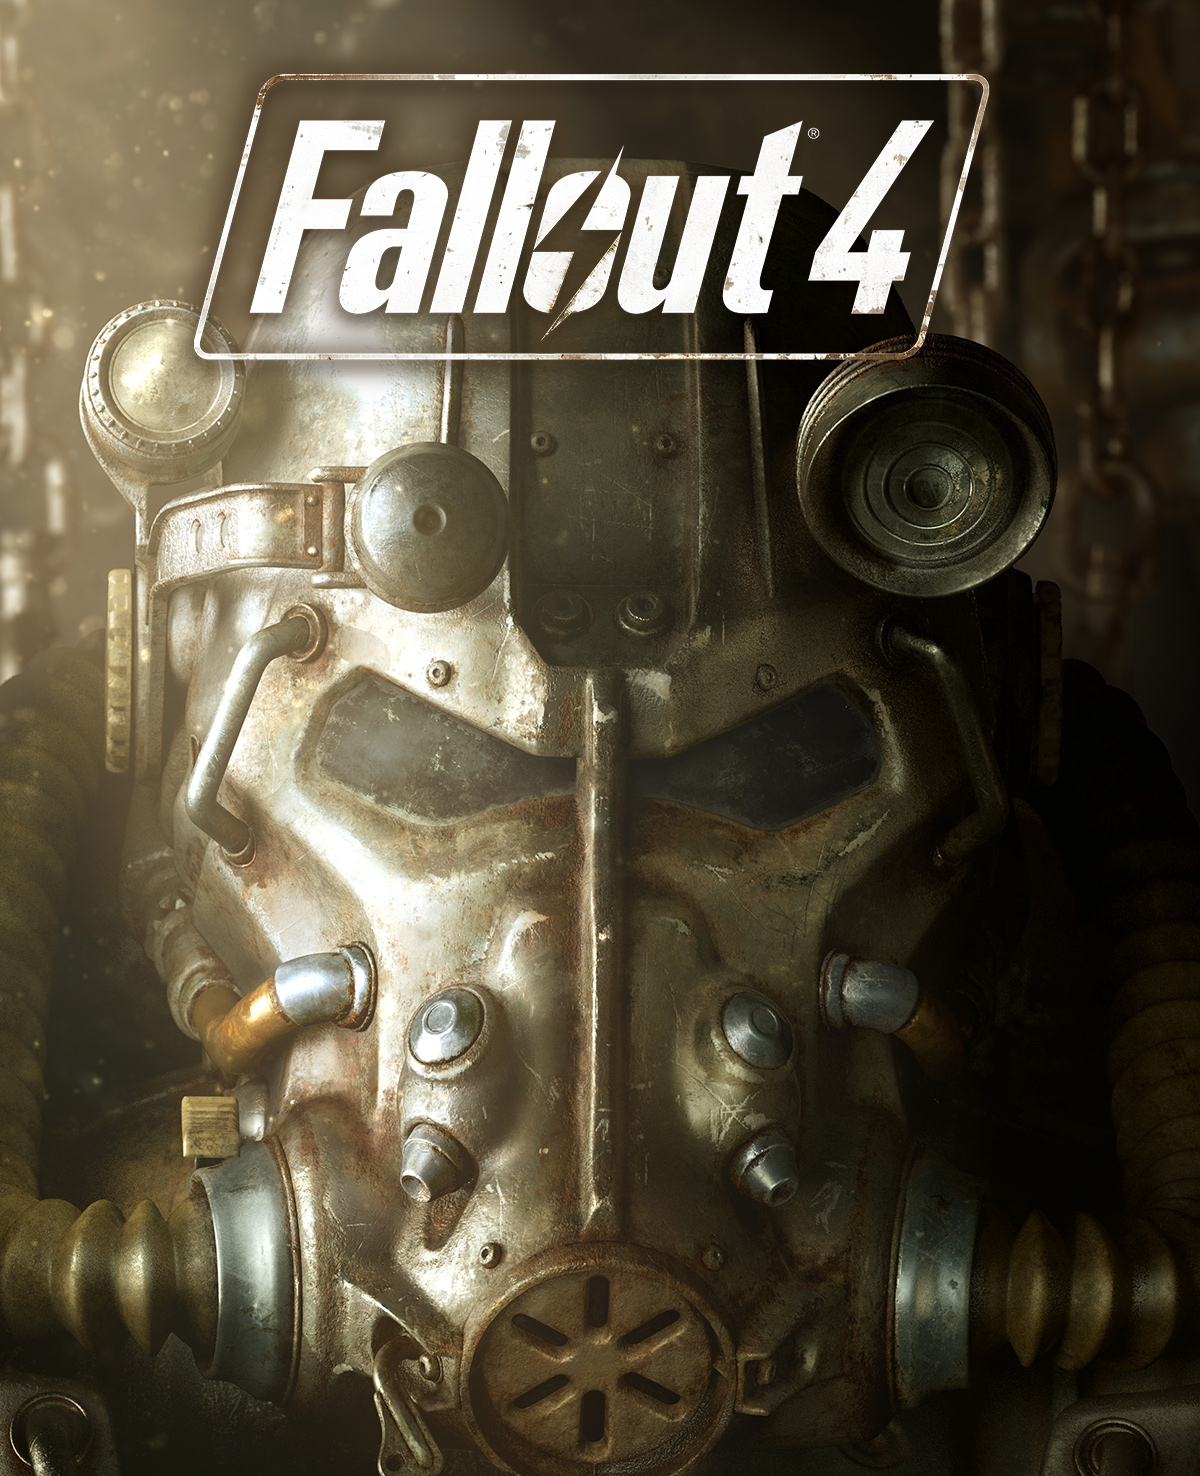 Fallout 4: Game of the Year Edition Now Available